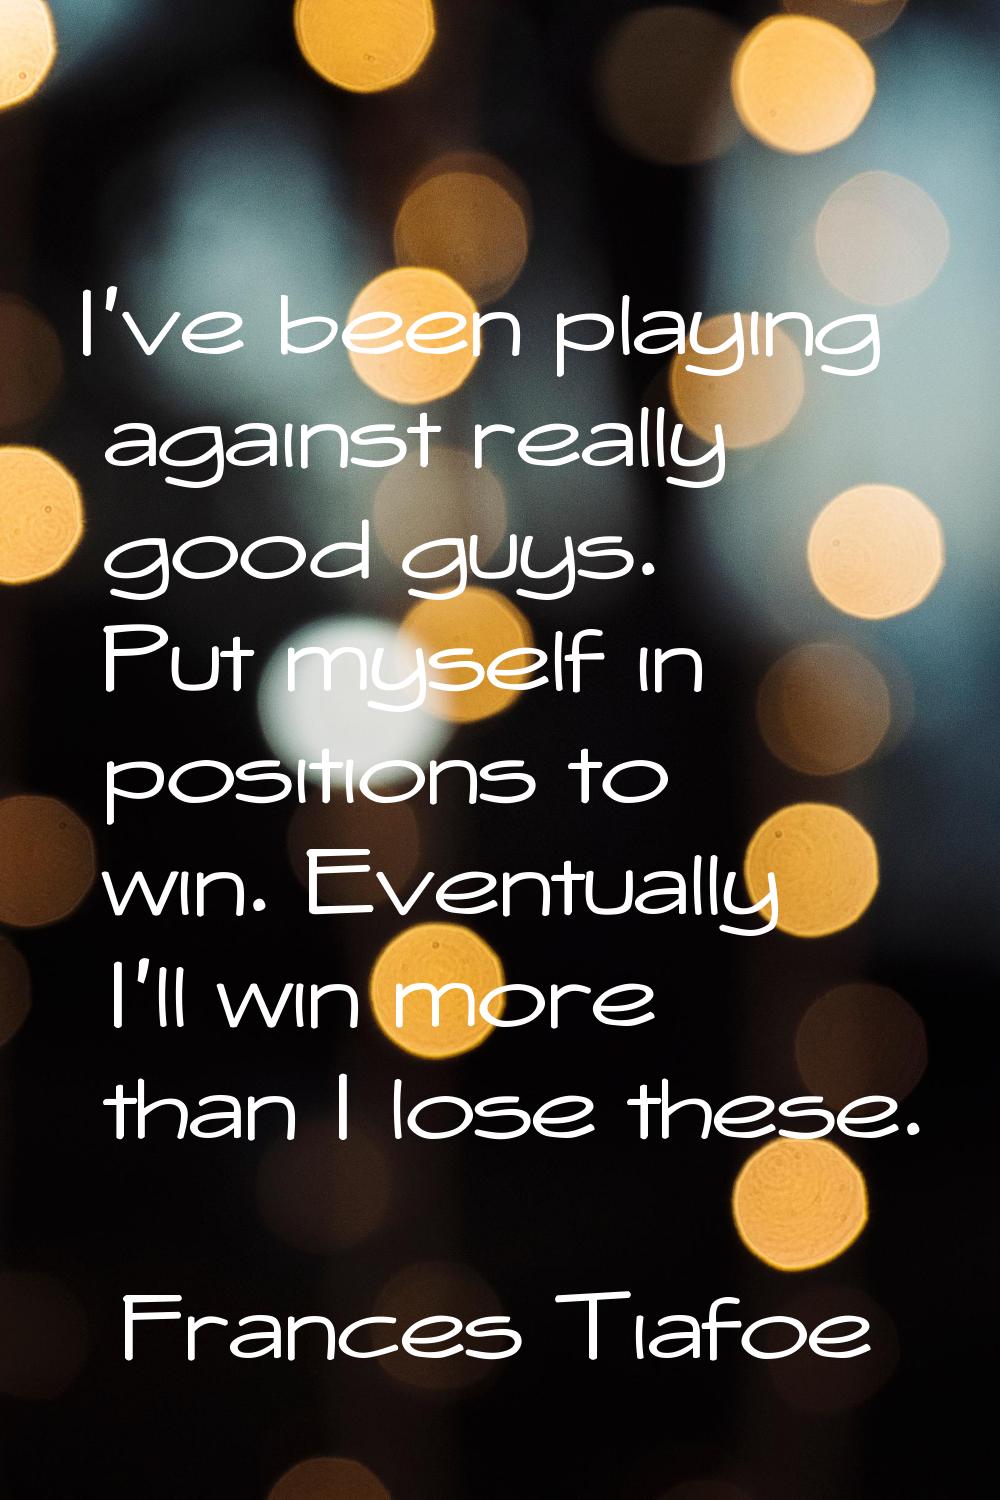 I've been playing against really good guys. Put myself in positions to win. Eventually I'll win mor